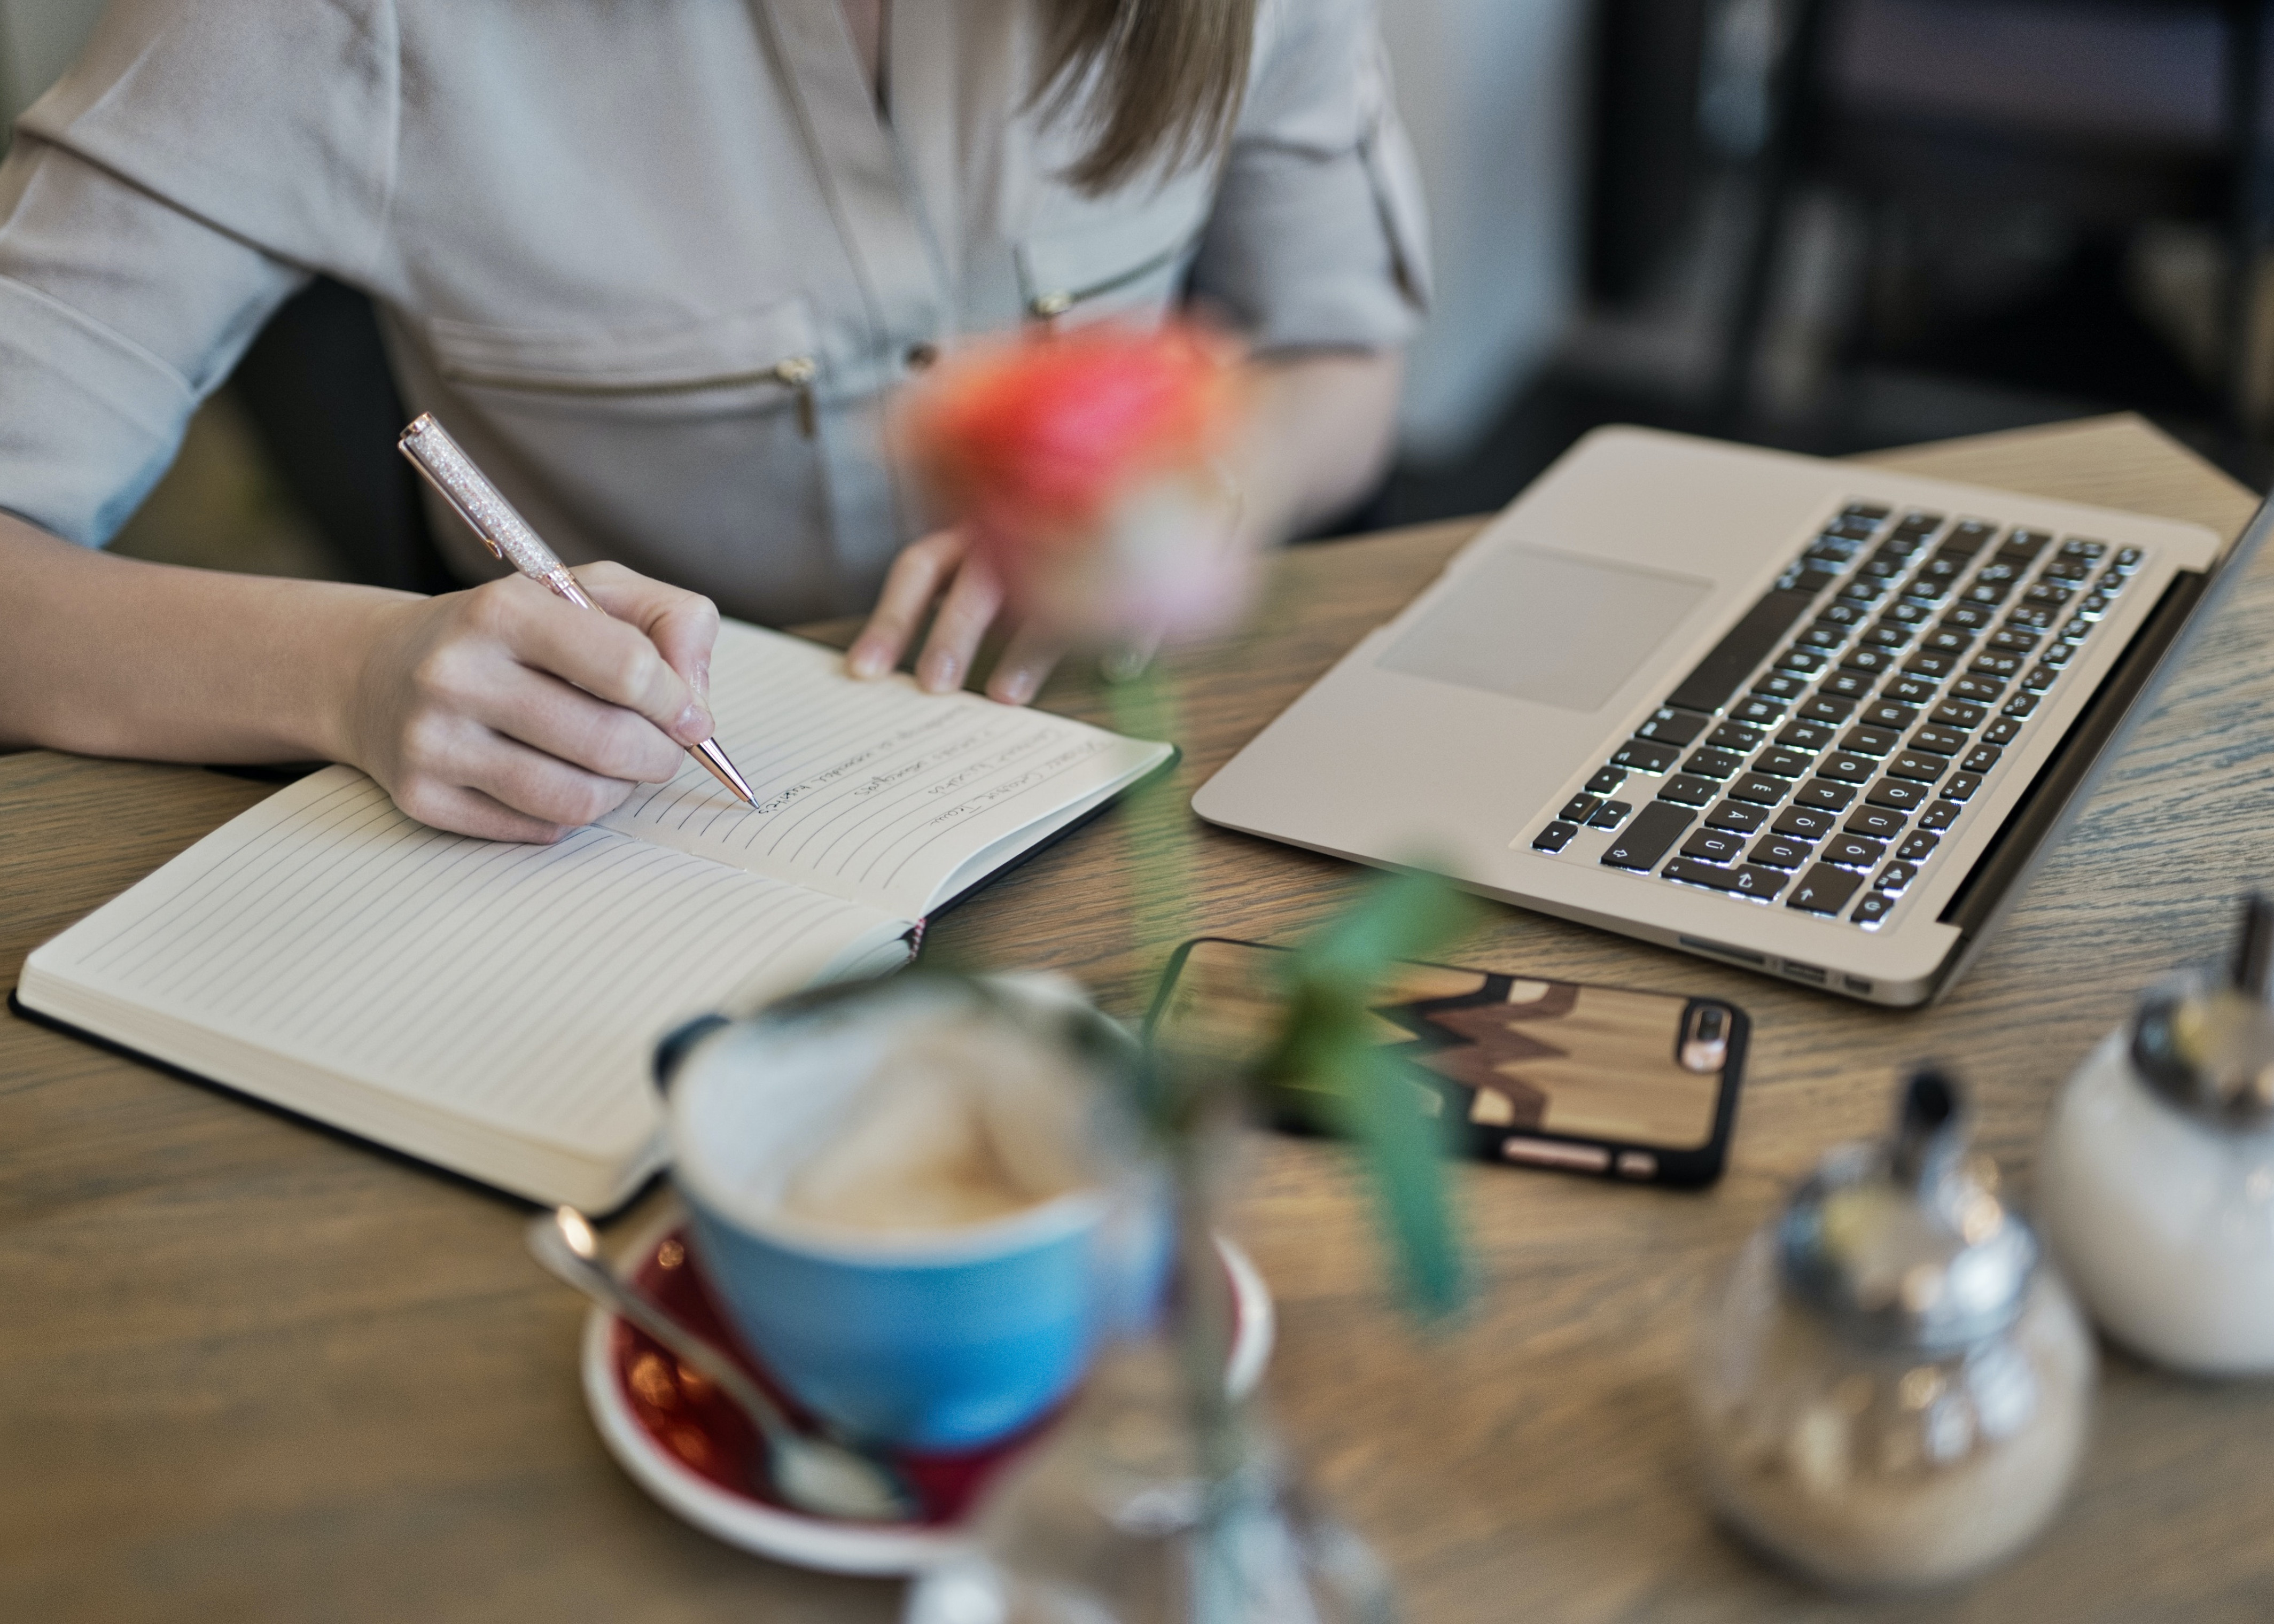 The photo is correlated with the Technical Assistance section of the website and features an individual seated at a table, actively engaged in their work. They are captured writing in a notebook while an open laptop sits nearby. On the table, a coffee mug and a blurred flower add subtle elements to the scene.